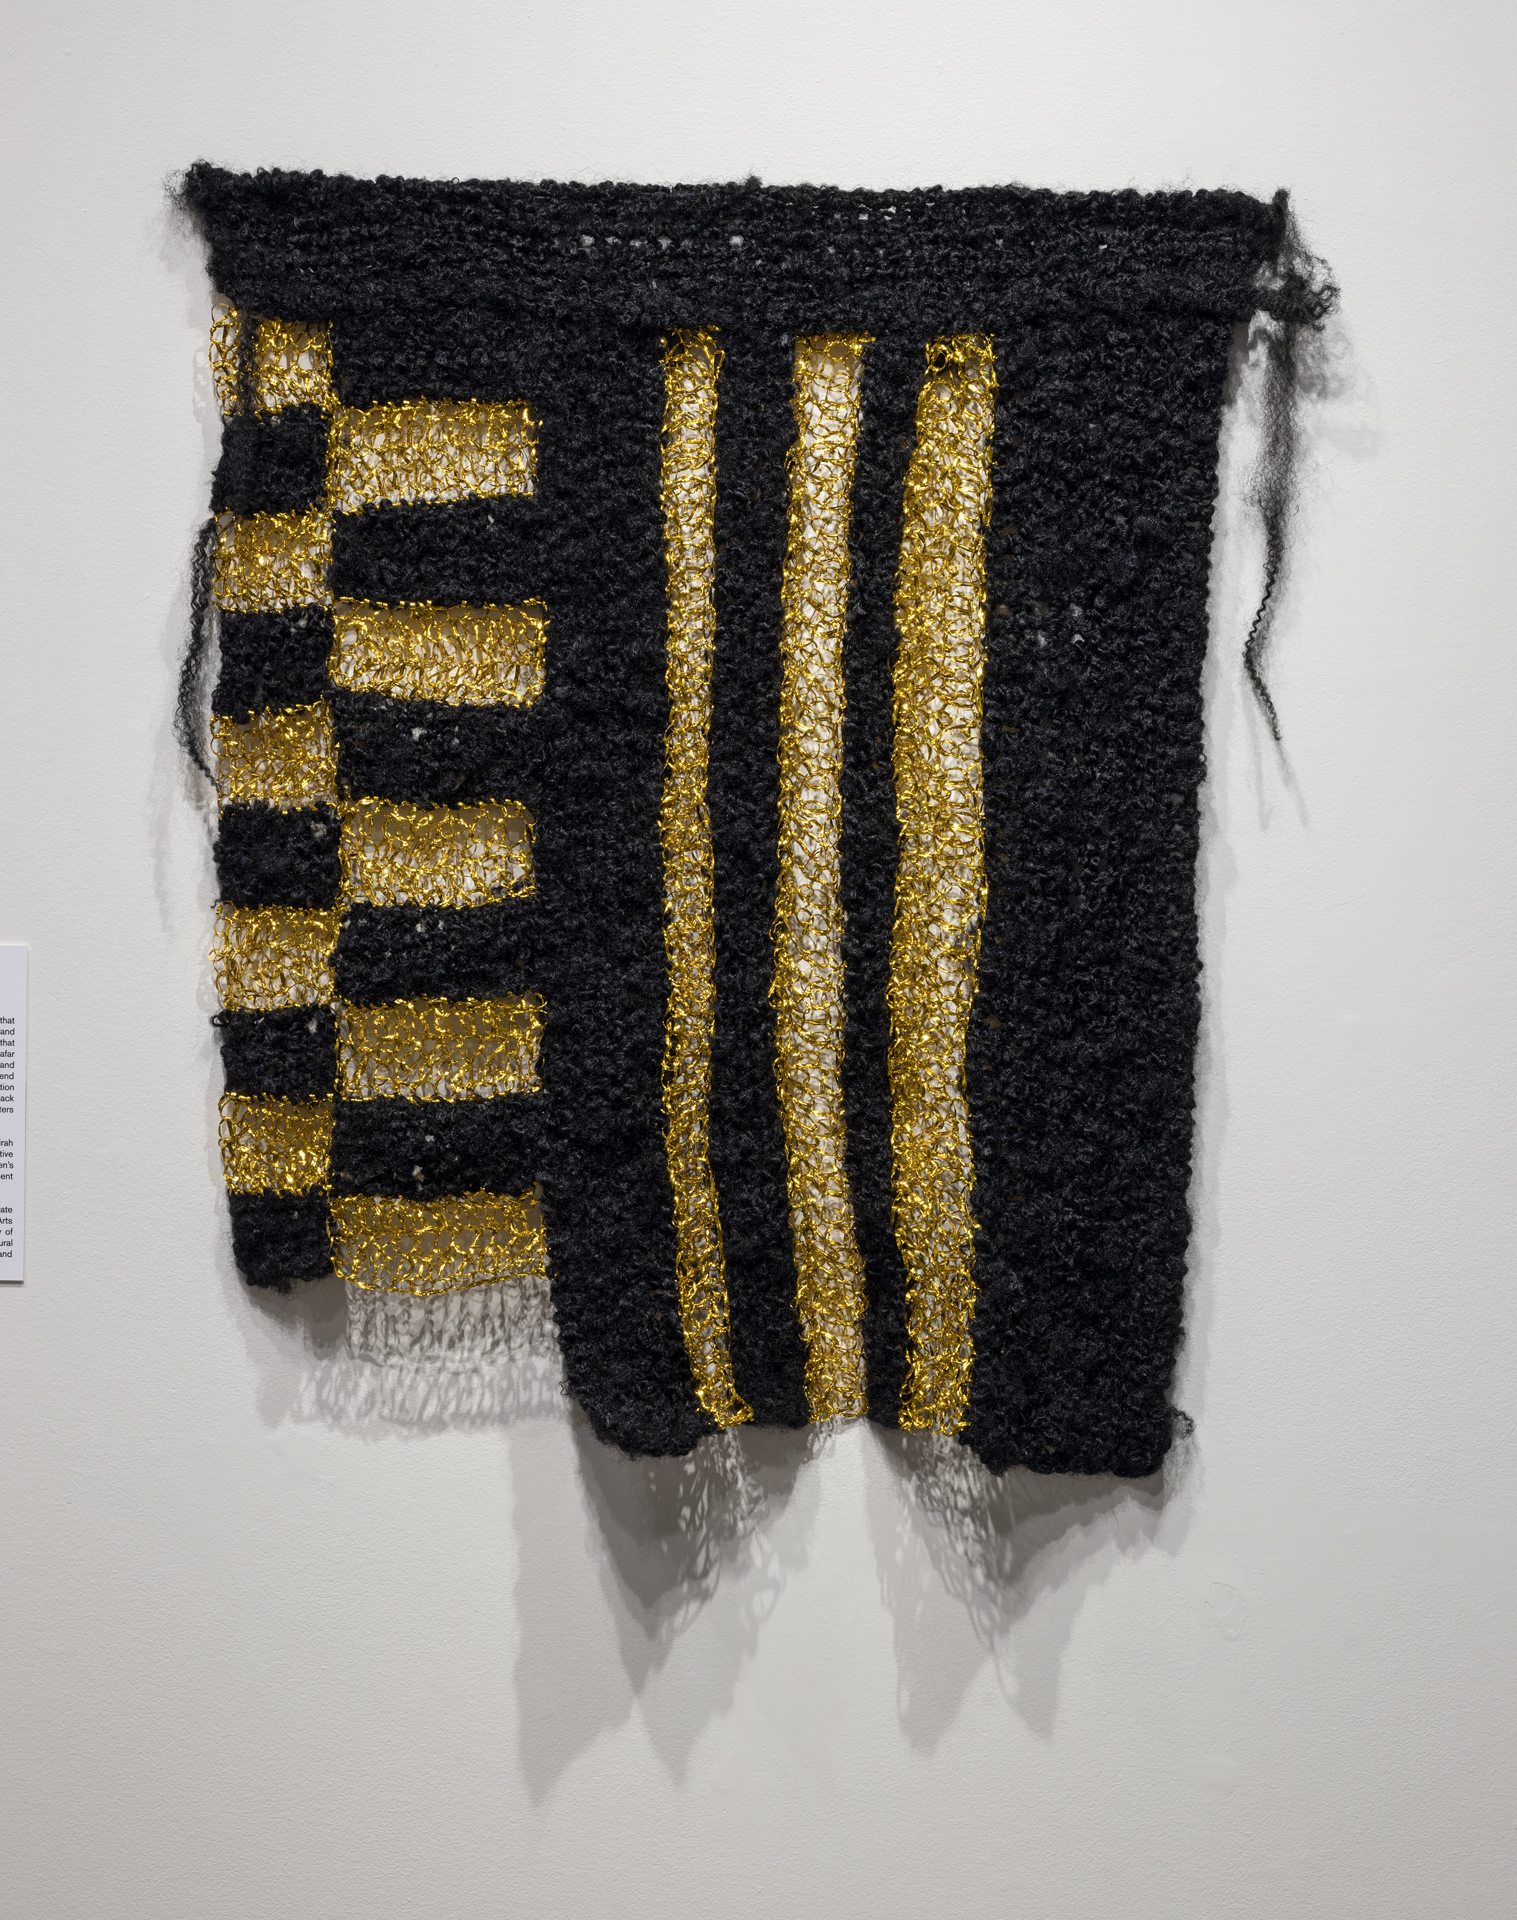 Artwork hanging on a wall. Black and gold textile to form vertical pattern.